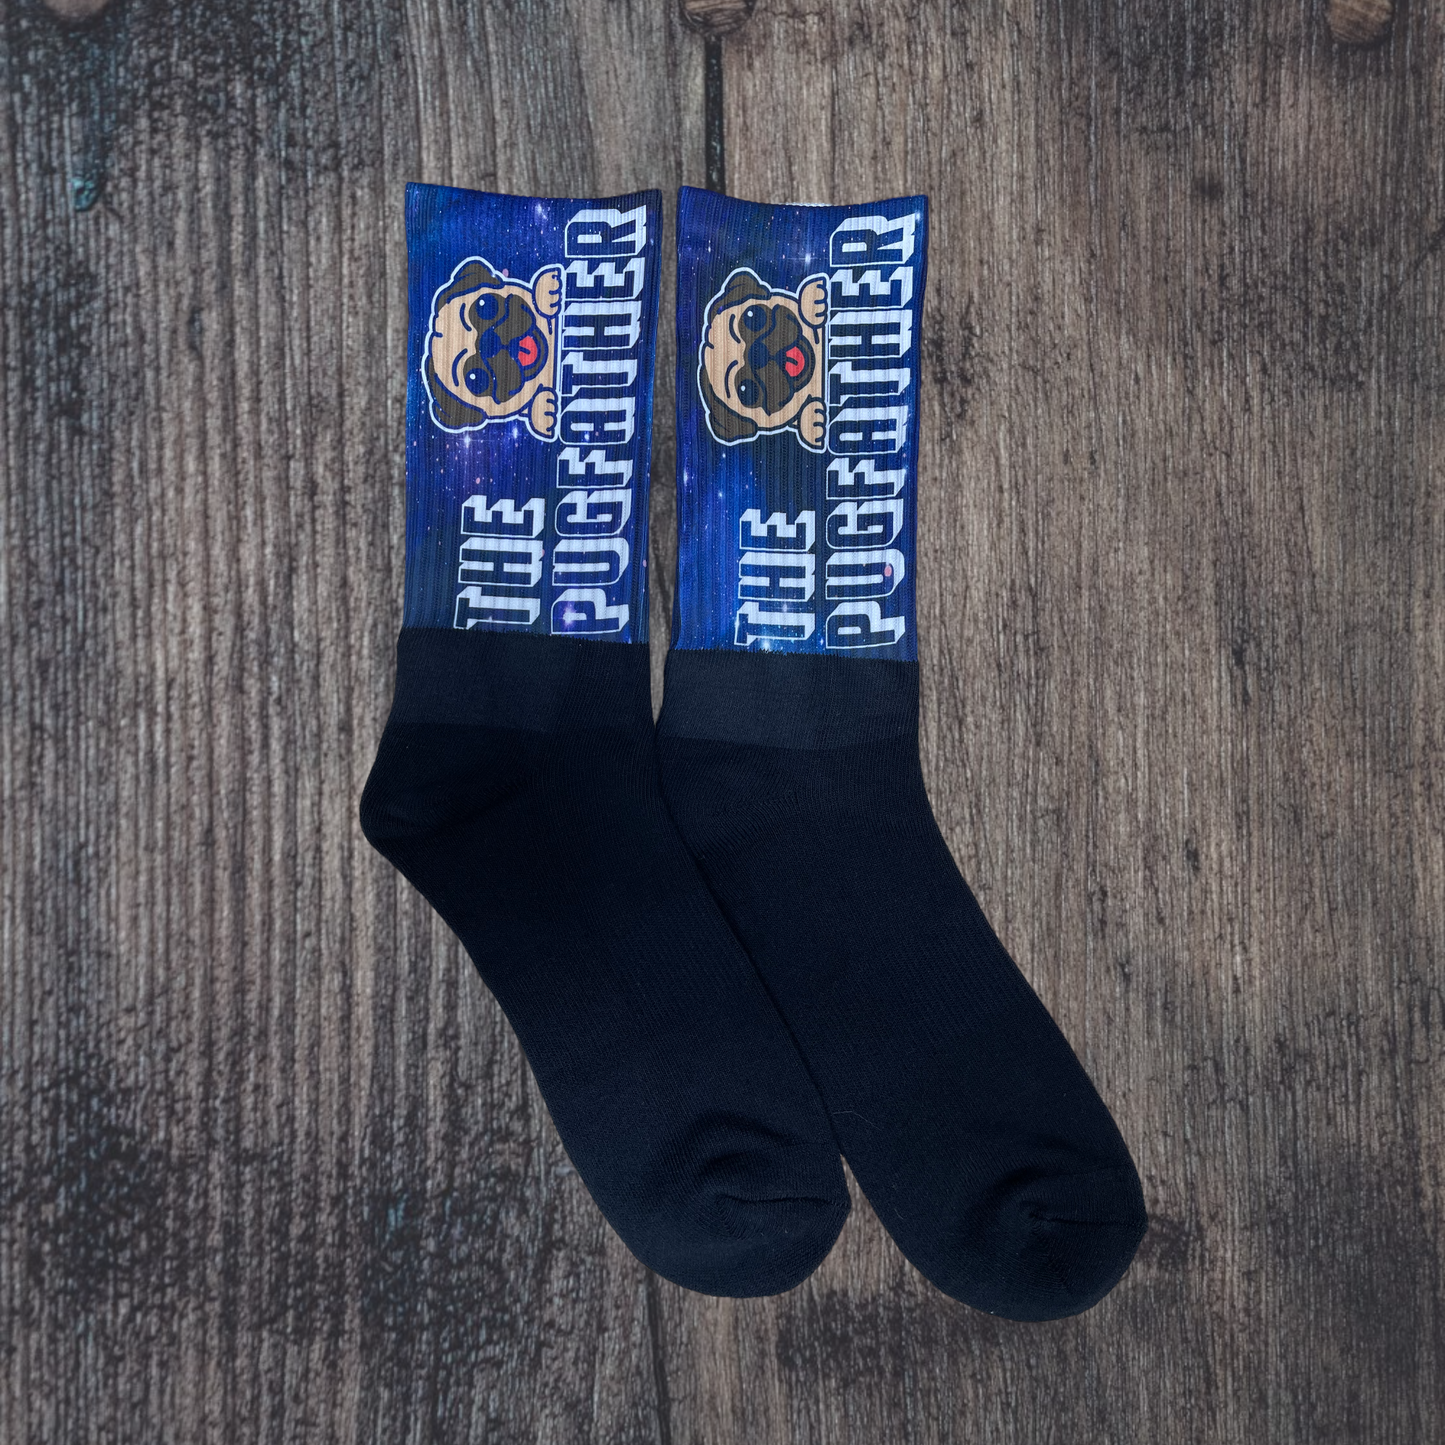 The pug father athletic socks. Handcrafted in the USA.